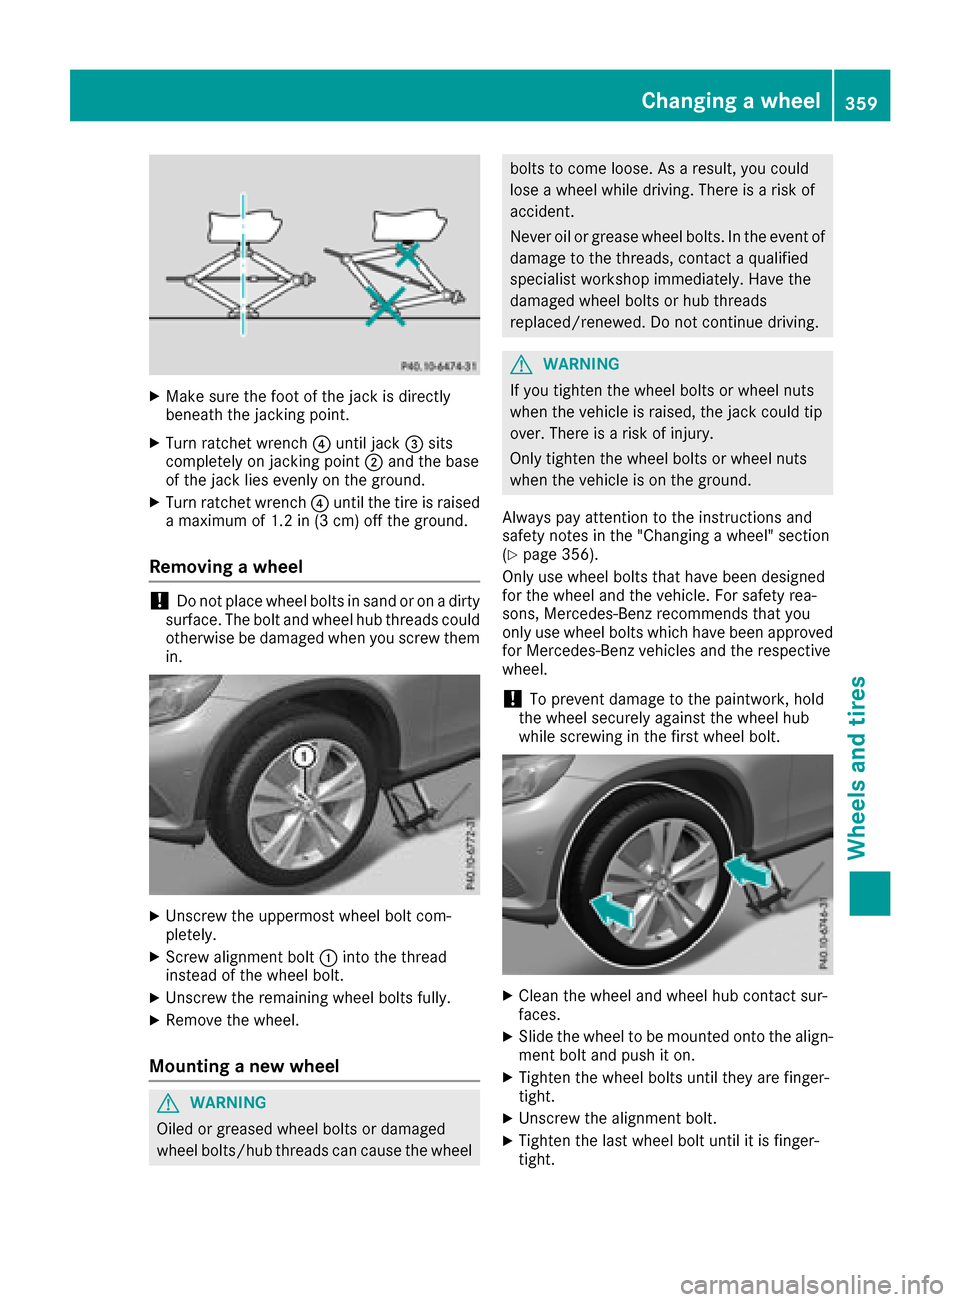 MERCEDES-BENZ GLC SUV 2017 X253 Owners Manual XMake sure the foot of the jack is directly
beneath the jacking point.
XTurn ratchet wrench?until jack =sits
completely on jacking point ;and the base
of the jack lies evenly on the ground.
XTurn ratc